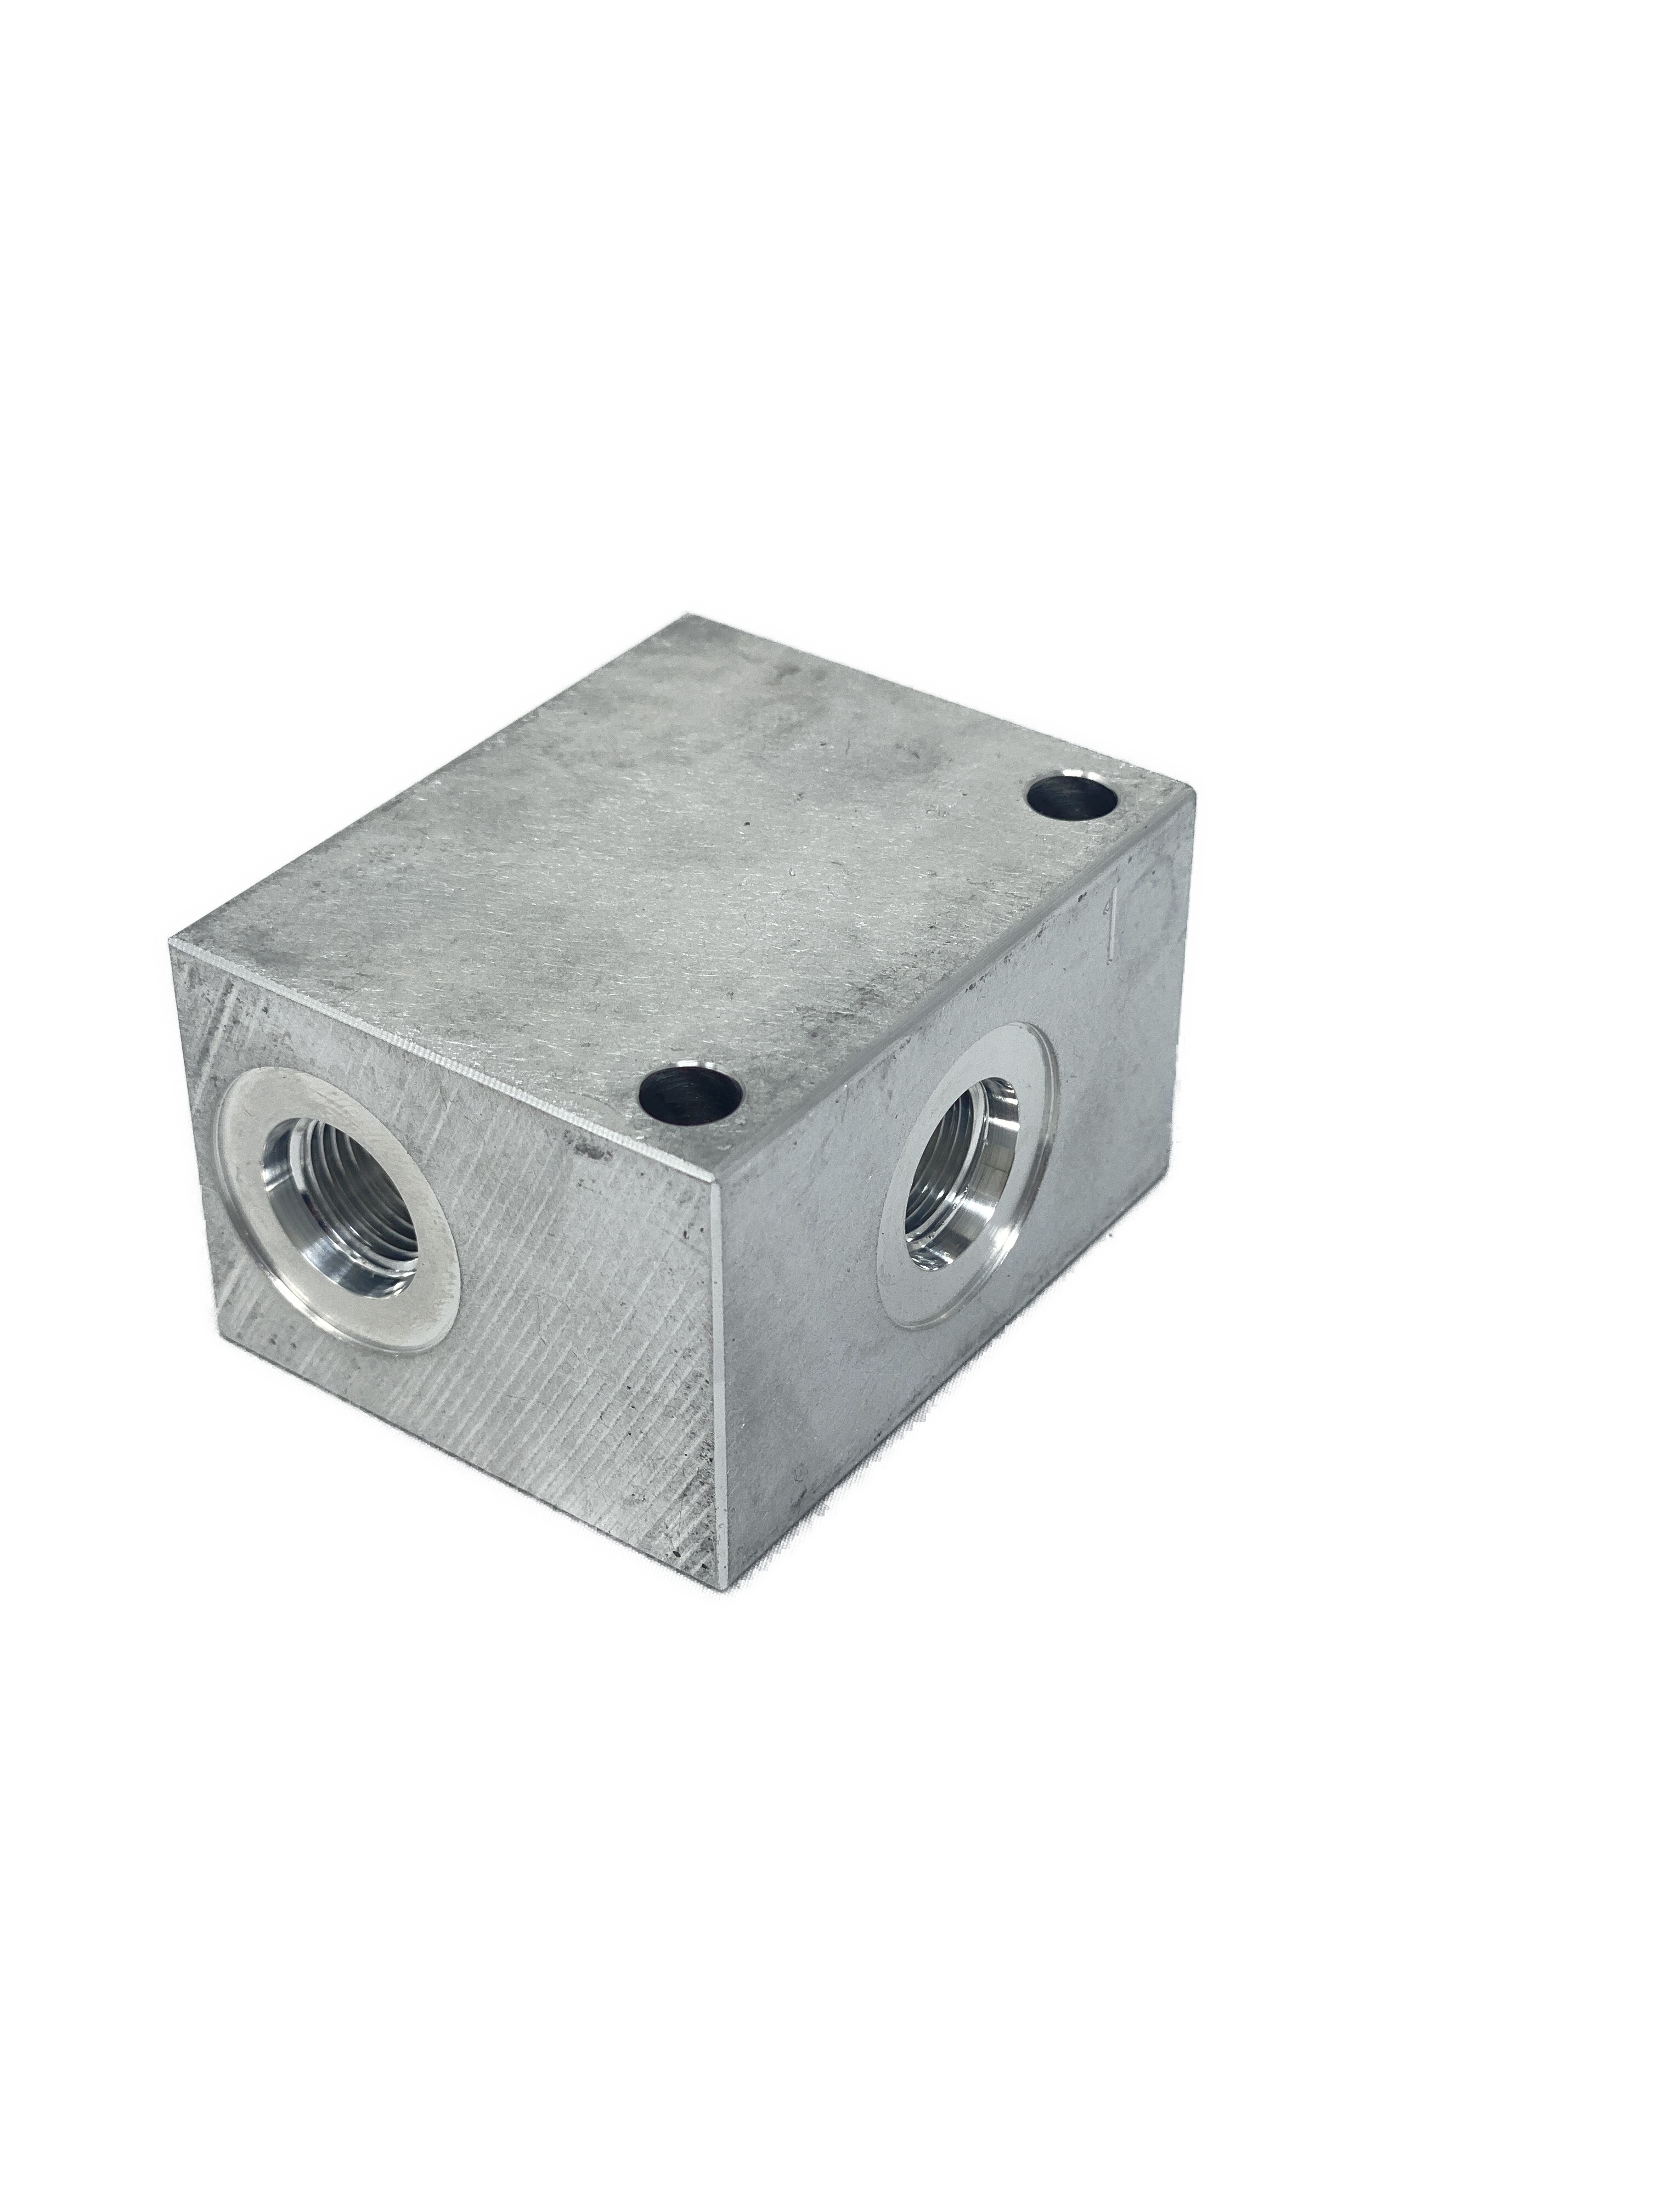 AC102CB6S : Daman Common Cavity Body, C-10-2 Cartridge Cavity, #6 SAE (3/8") Port Connections, 3000psi Rated, Aluminum, Without Gauge Port